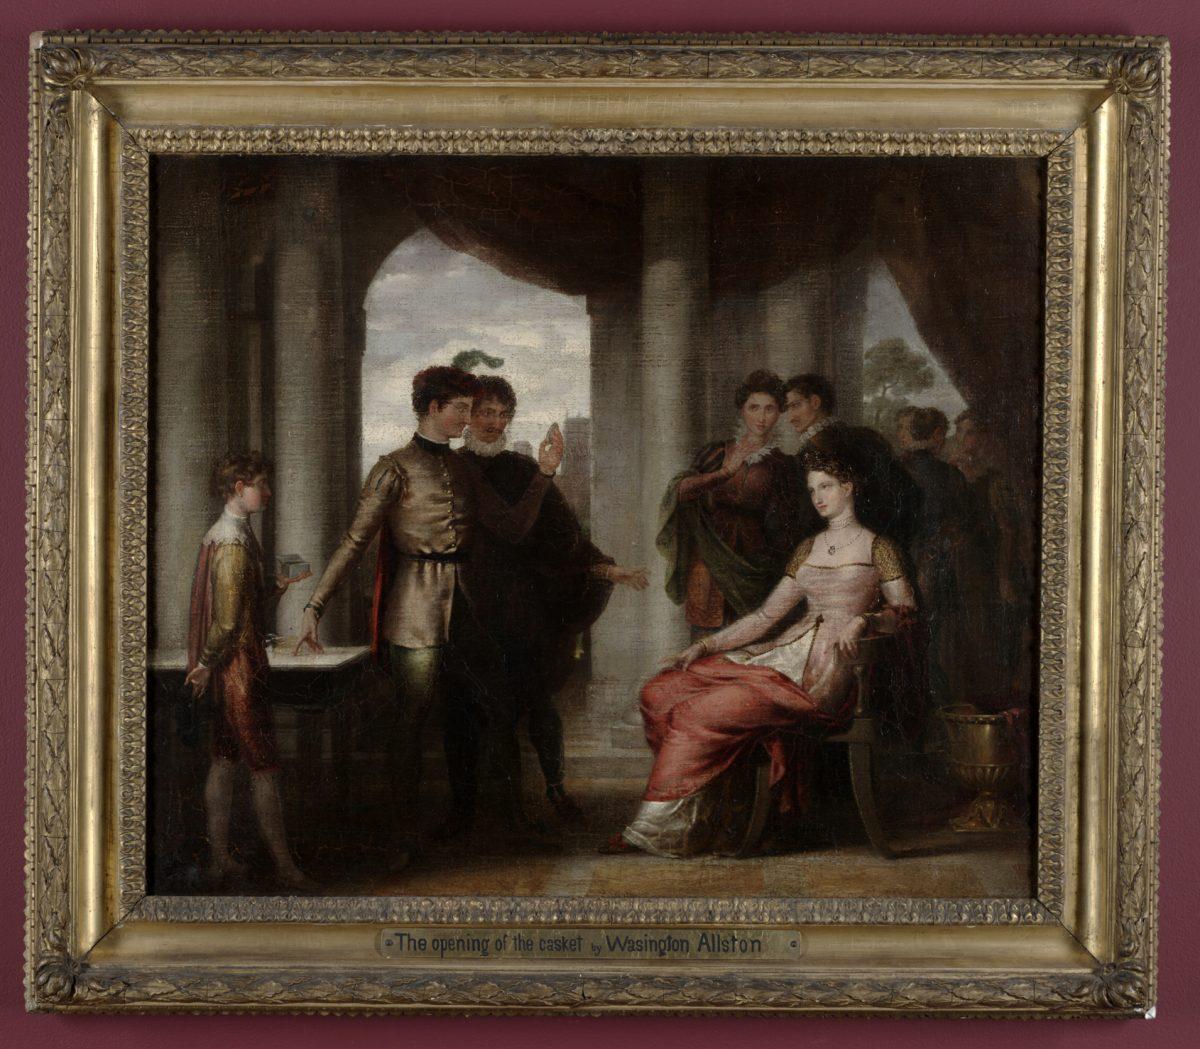 The Casket Scene from "The Merchant of Venice" (Opening of the Casket),” circa 1807, by Washington Allston. Bequest of John E. Allston, nephew of the artist, 1877. Boston Athenaeum. ( Public Domain)